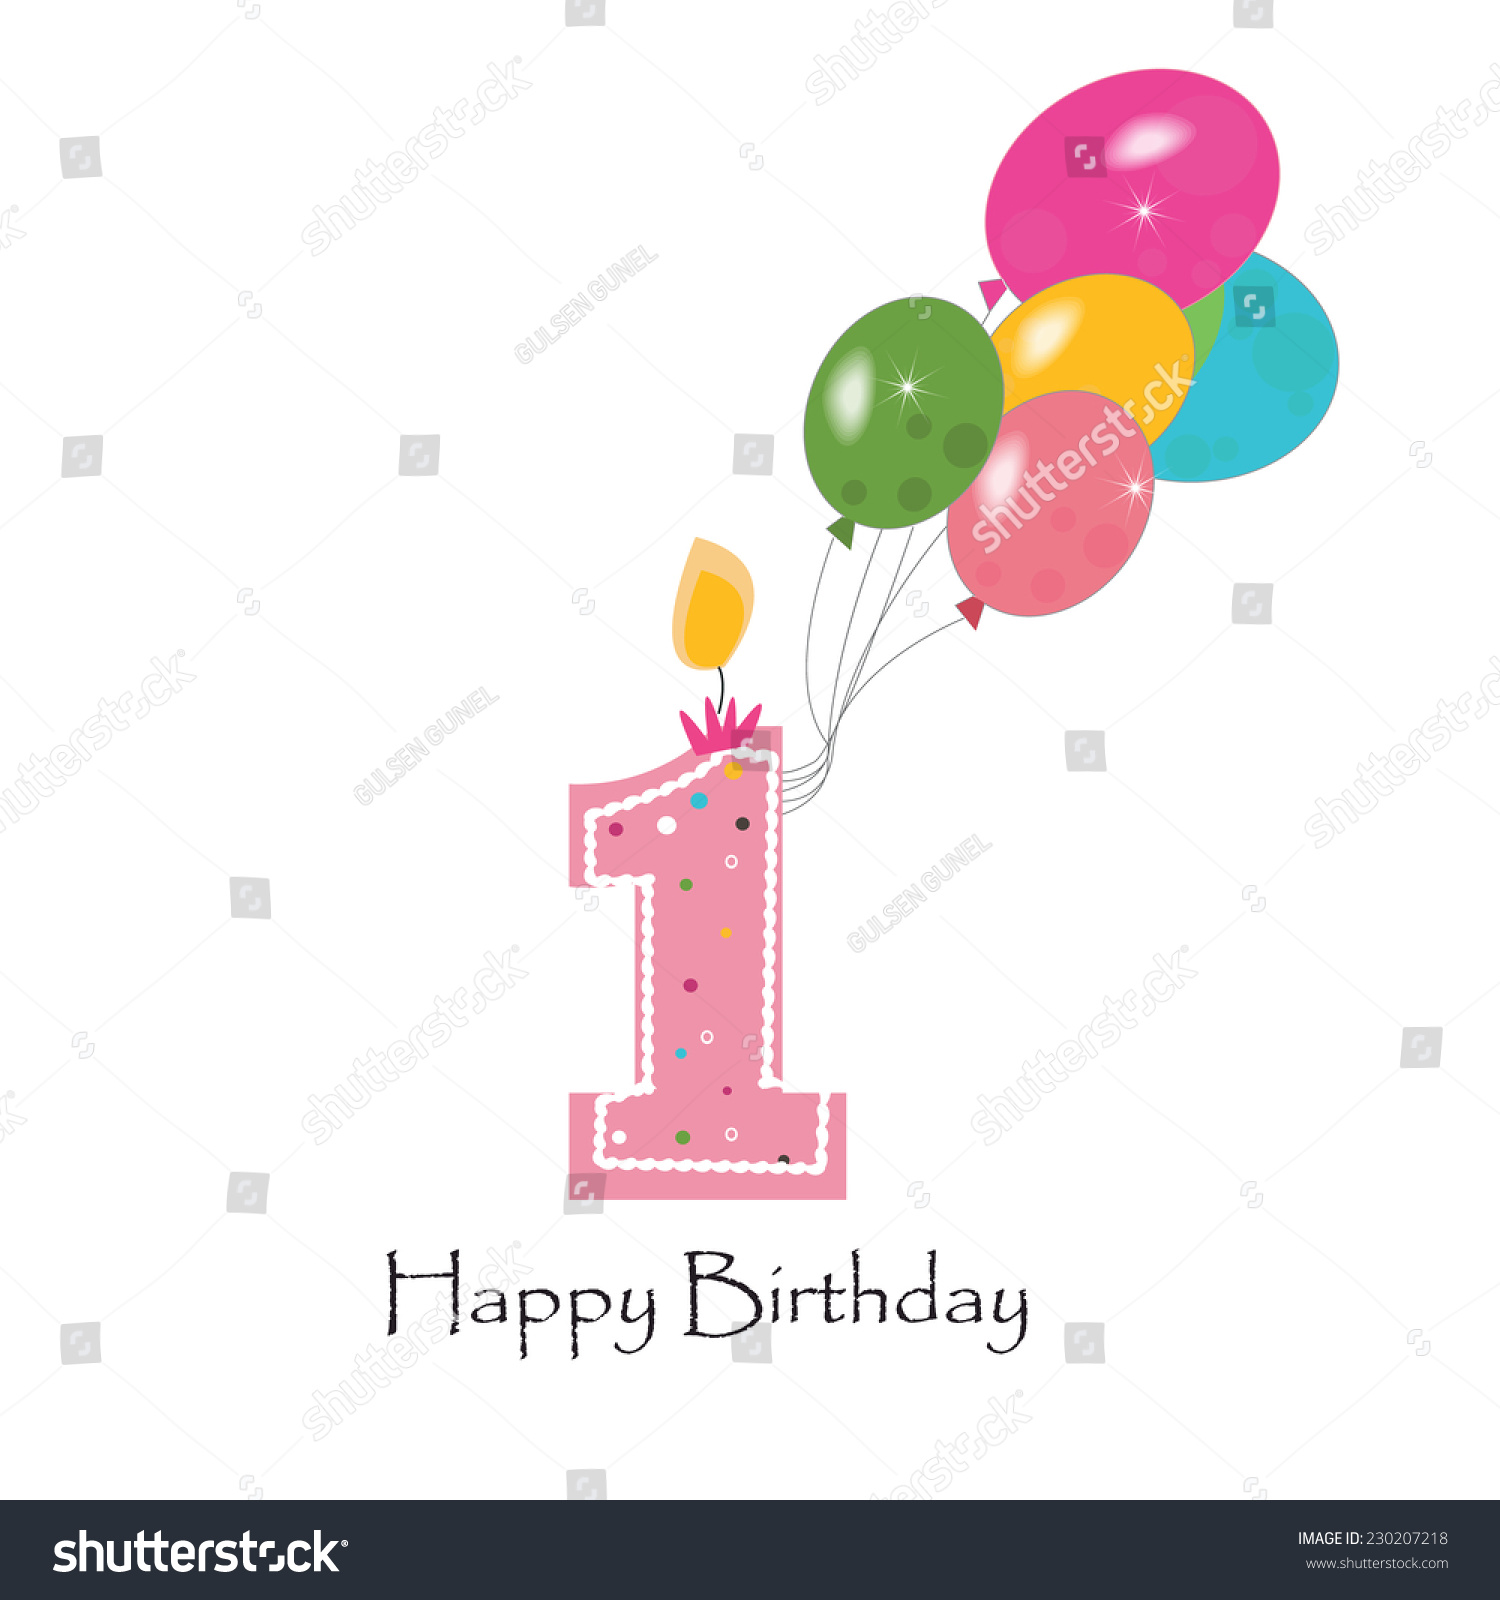 Happy First Birthday Colorful Balloon Vector Background - 230207218 ...